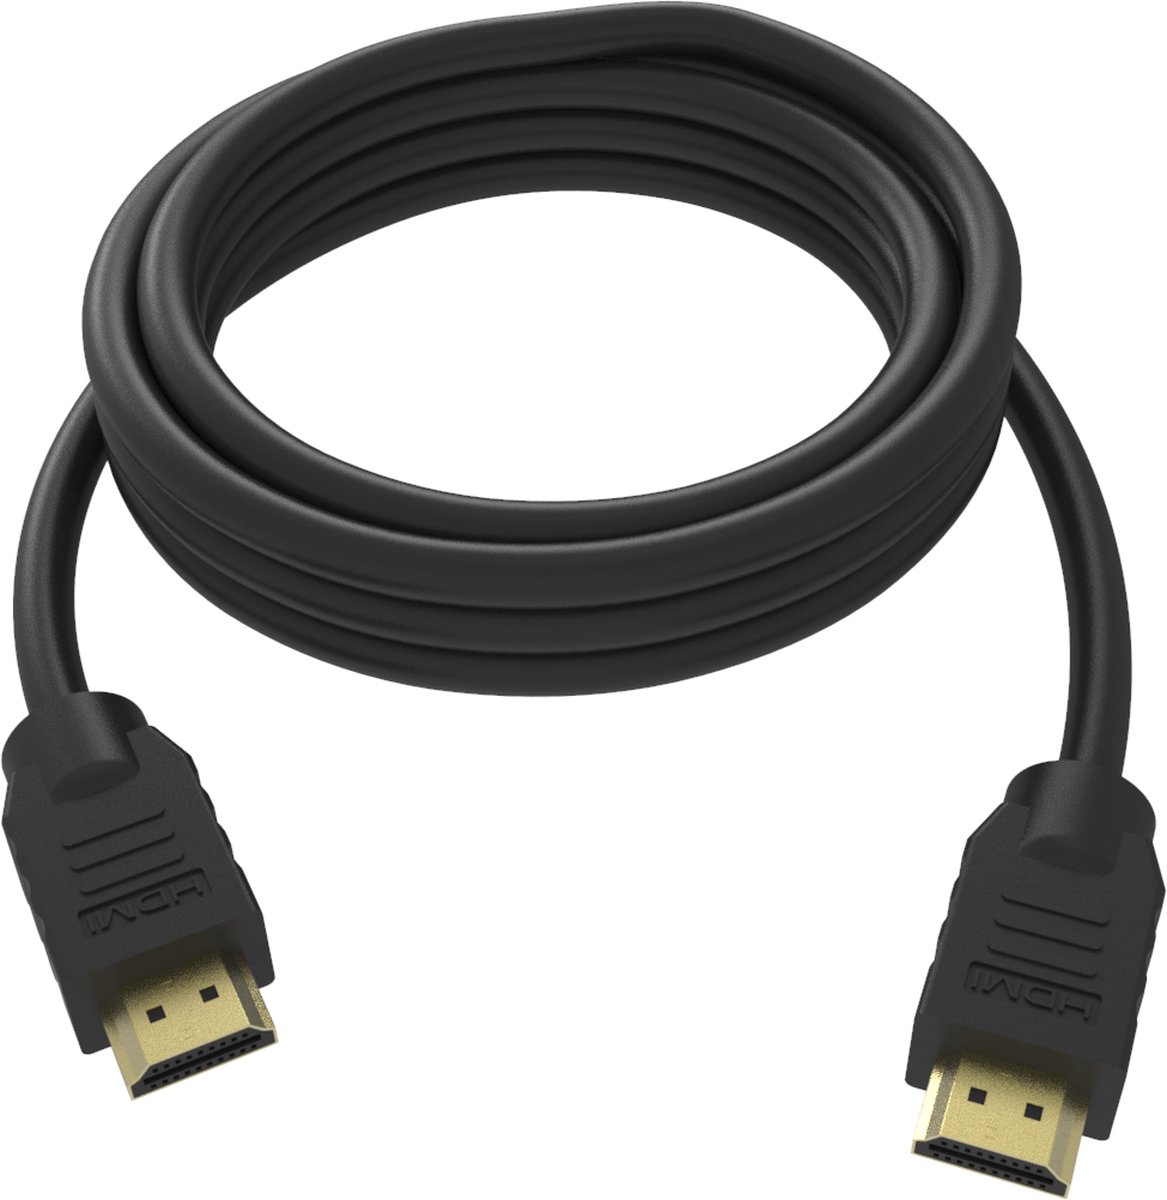 VISION Professional installation-grade HDMI cable - LIFETIME WARRANTY - 4K - HDMI version 2.0 - gold plated connectors -